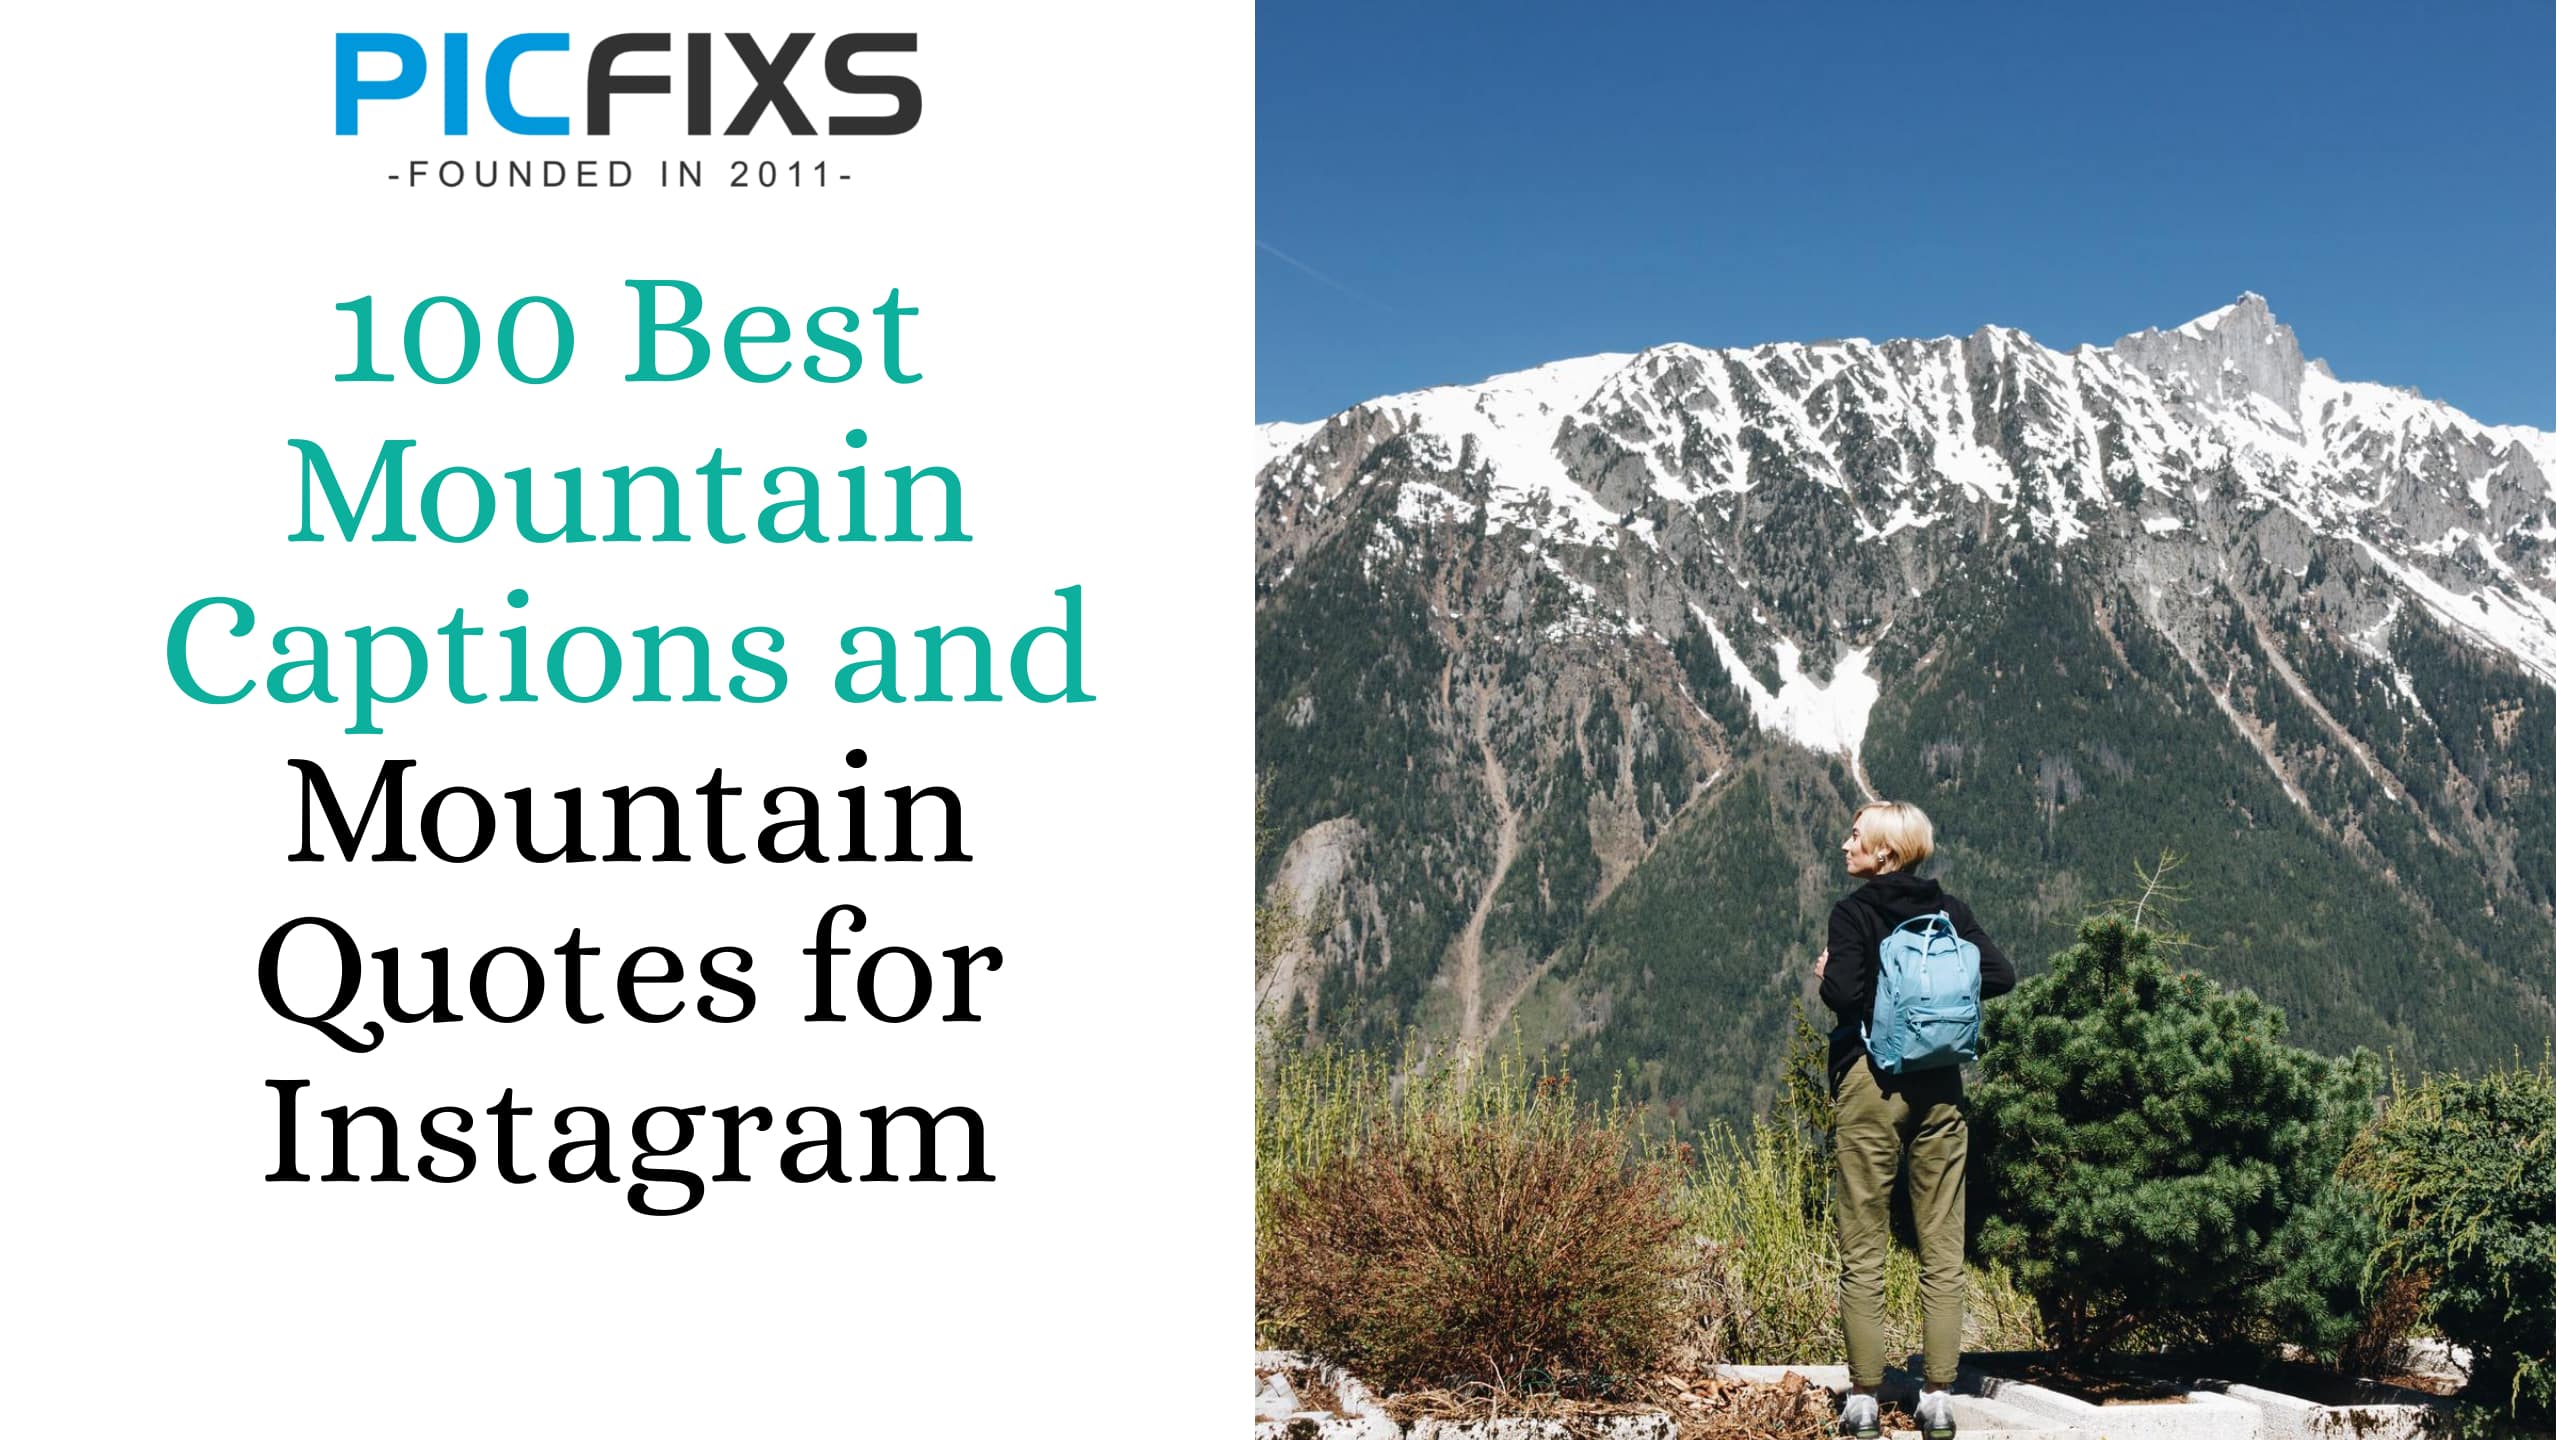 100 Best Mountain Captions and Mountain Quotes for Instagram